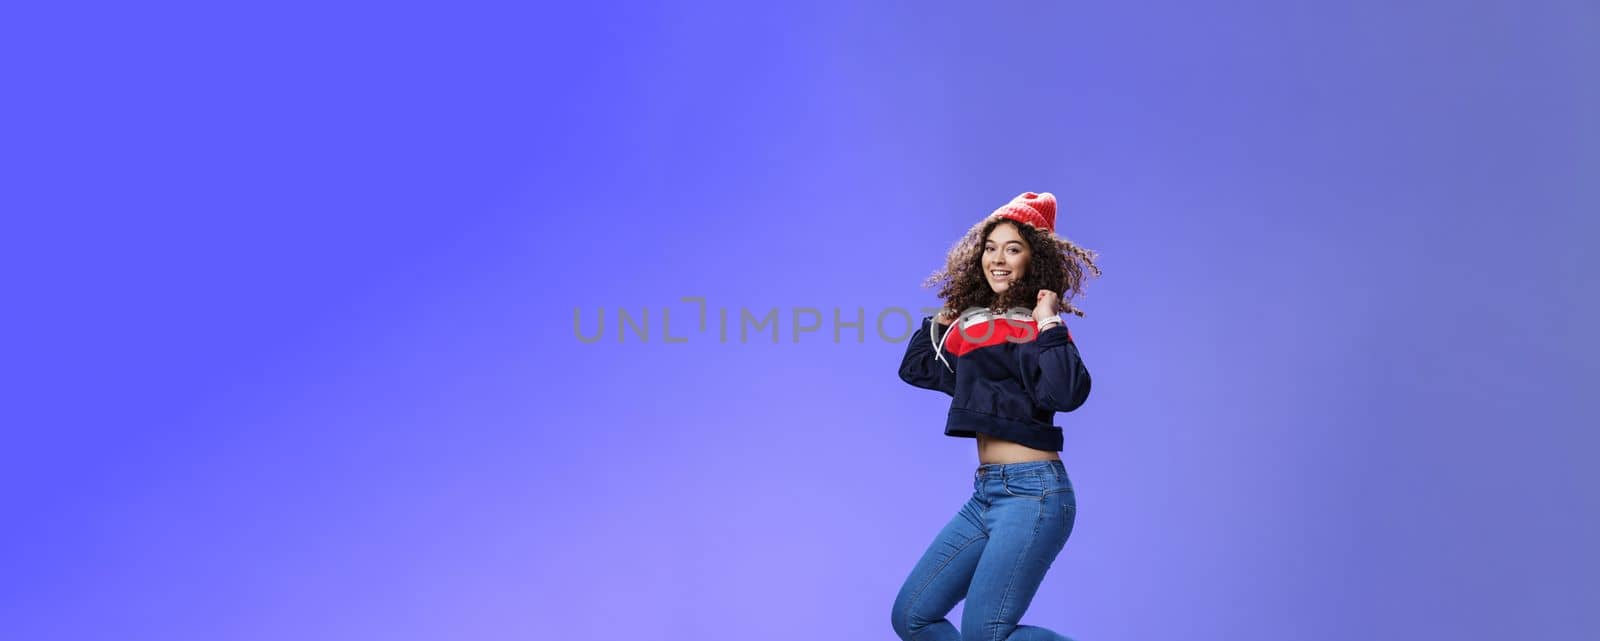 Studio shot of cute girl with curly hair in beanie sweatshirt and sneakers jumping playful and carefree over blue background, having fun enjoying cool weather smiling broadly as flying in air by Benzoix